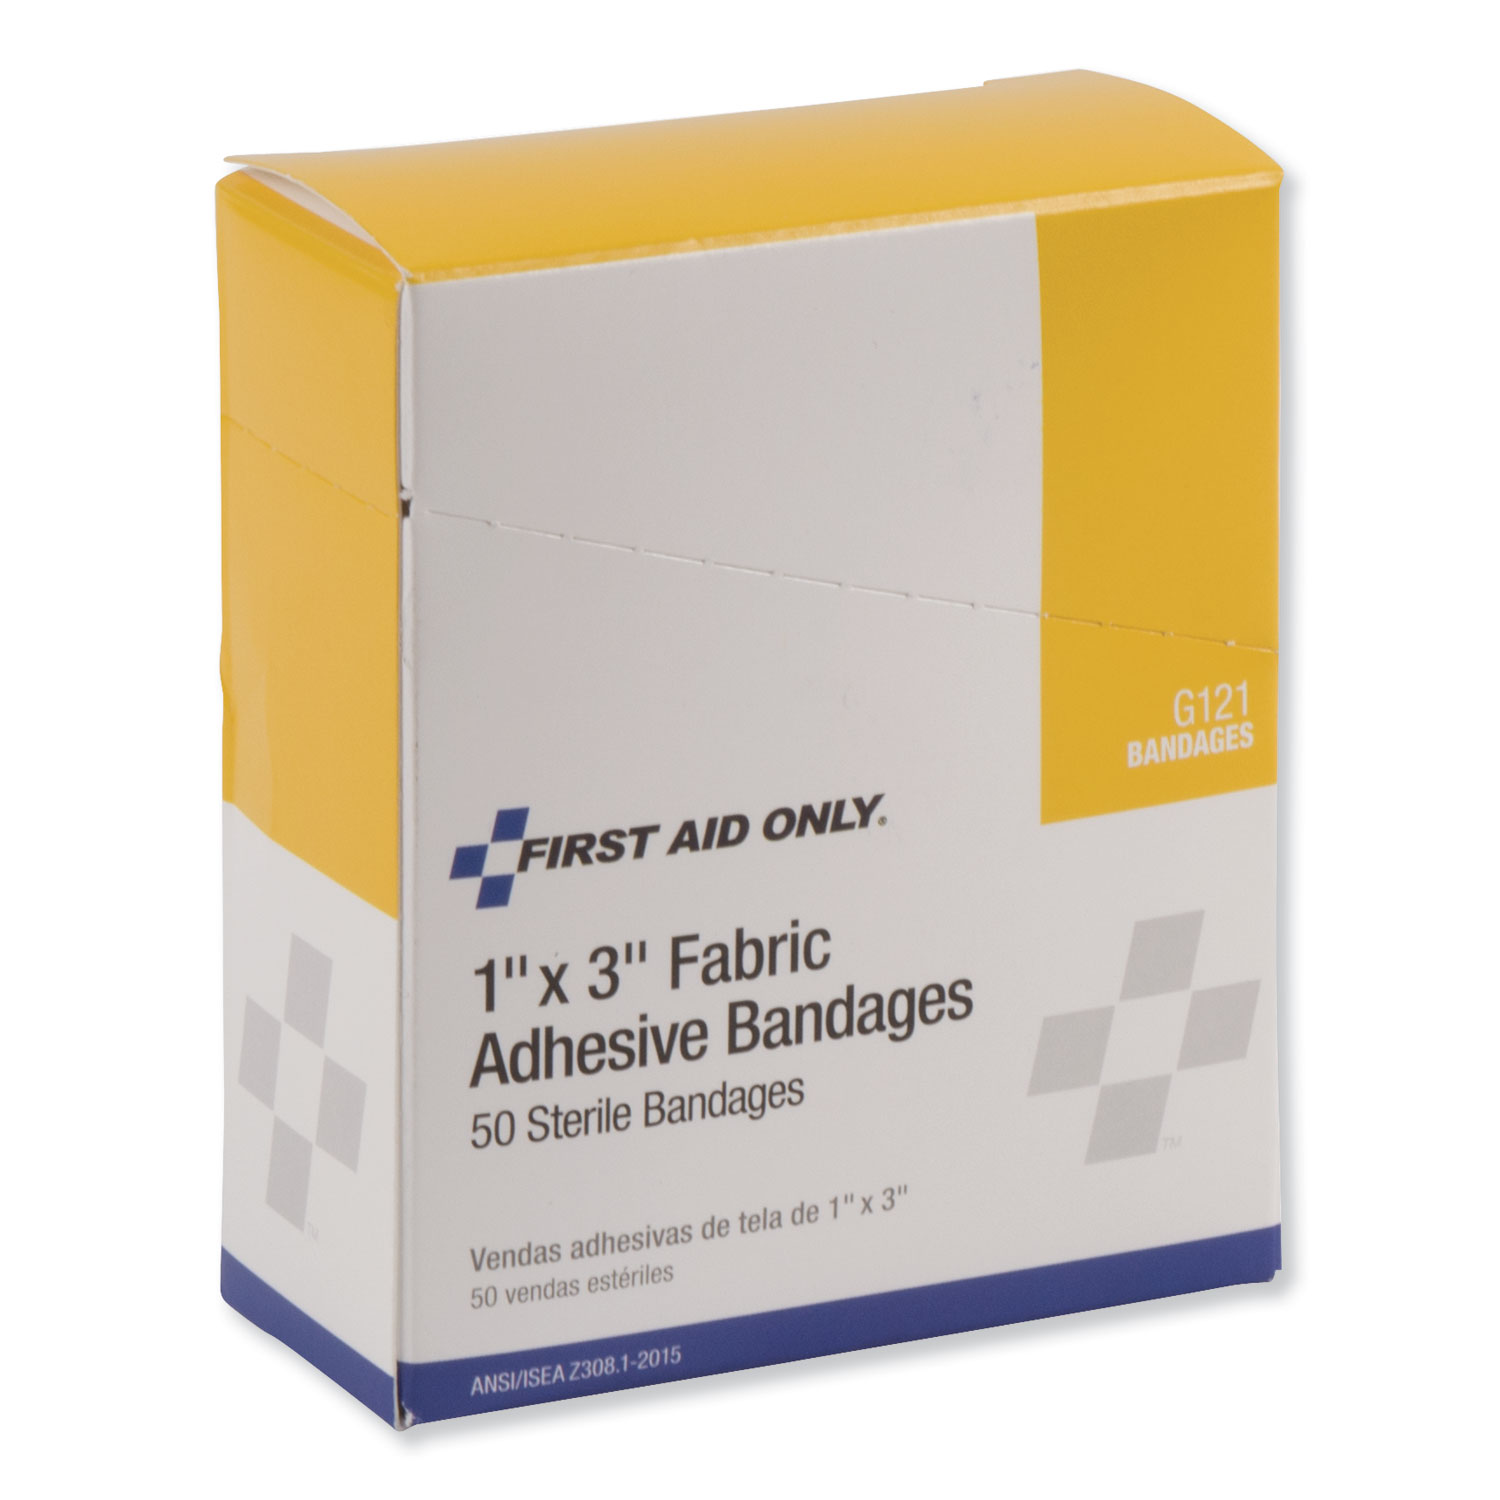 First Aid Fabric Bandages, 1